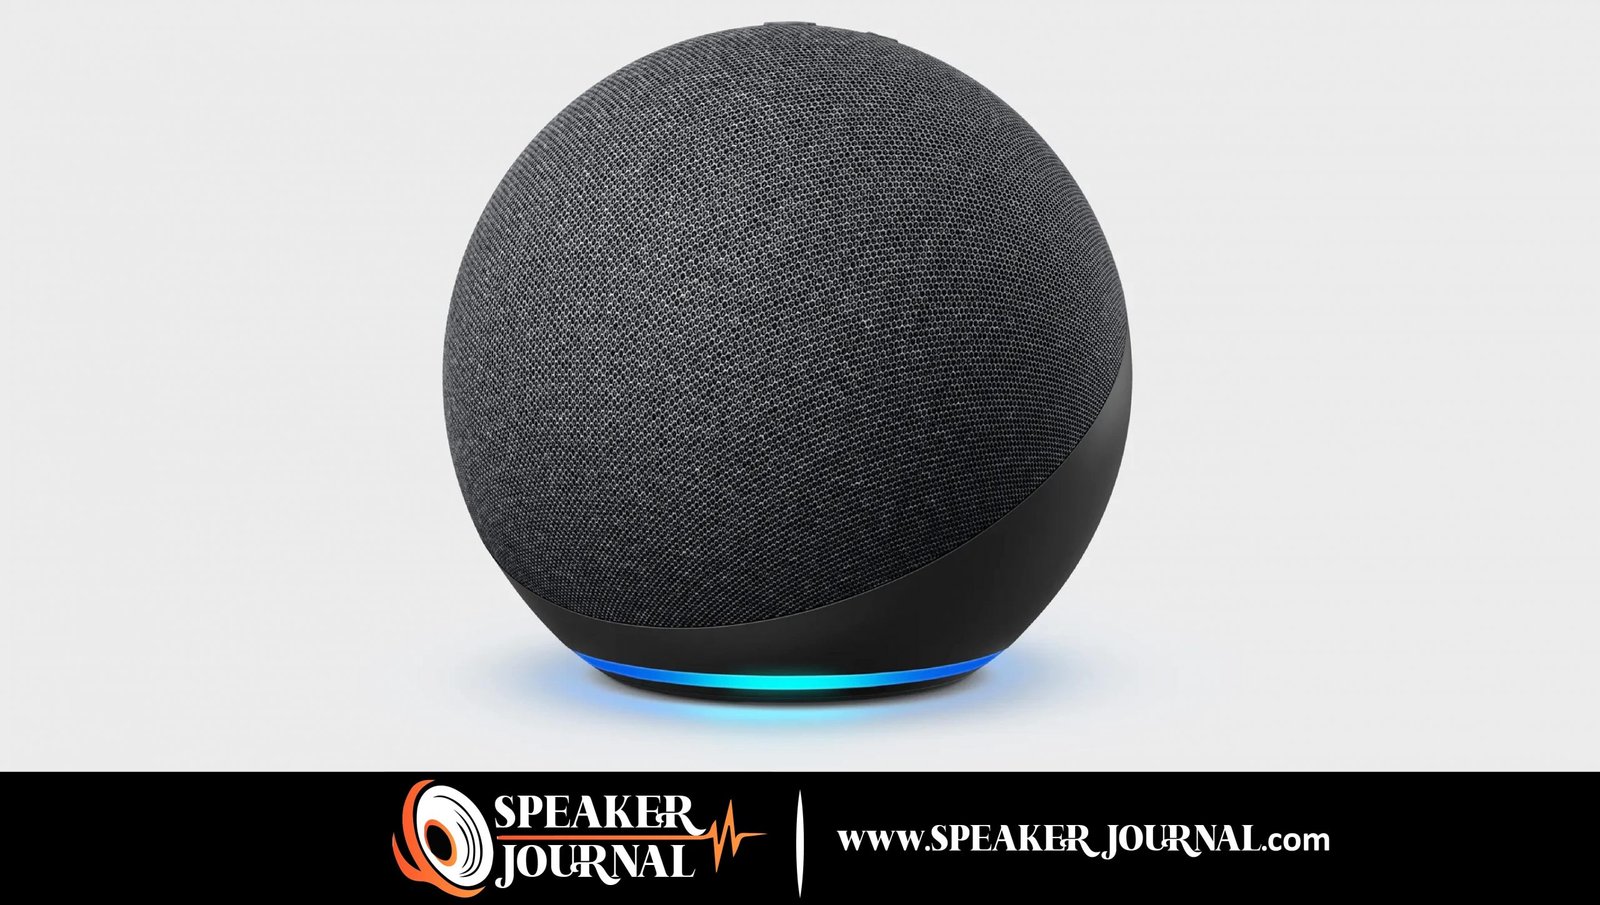 How To Use Alexa As a Speaker? by speakerjournal.com